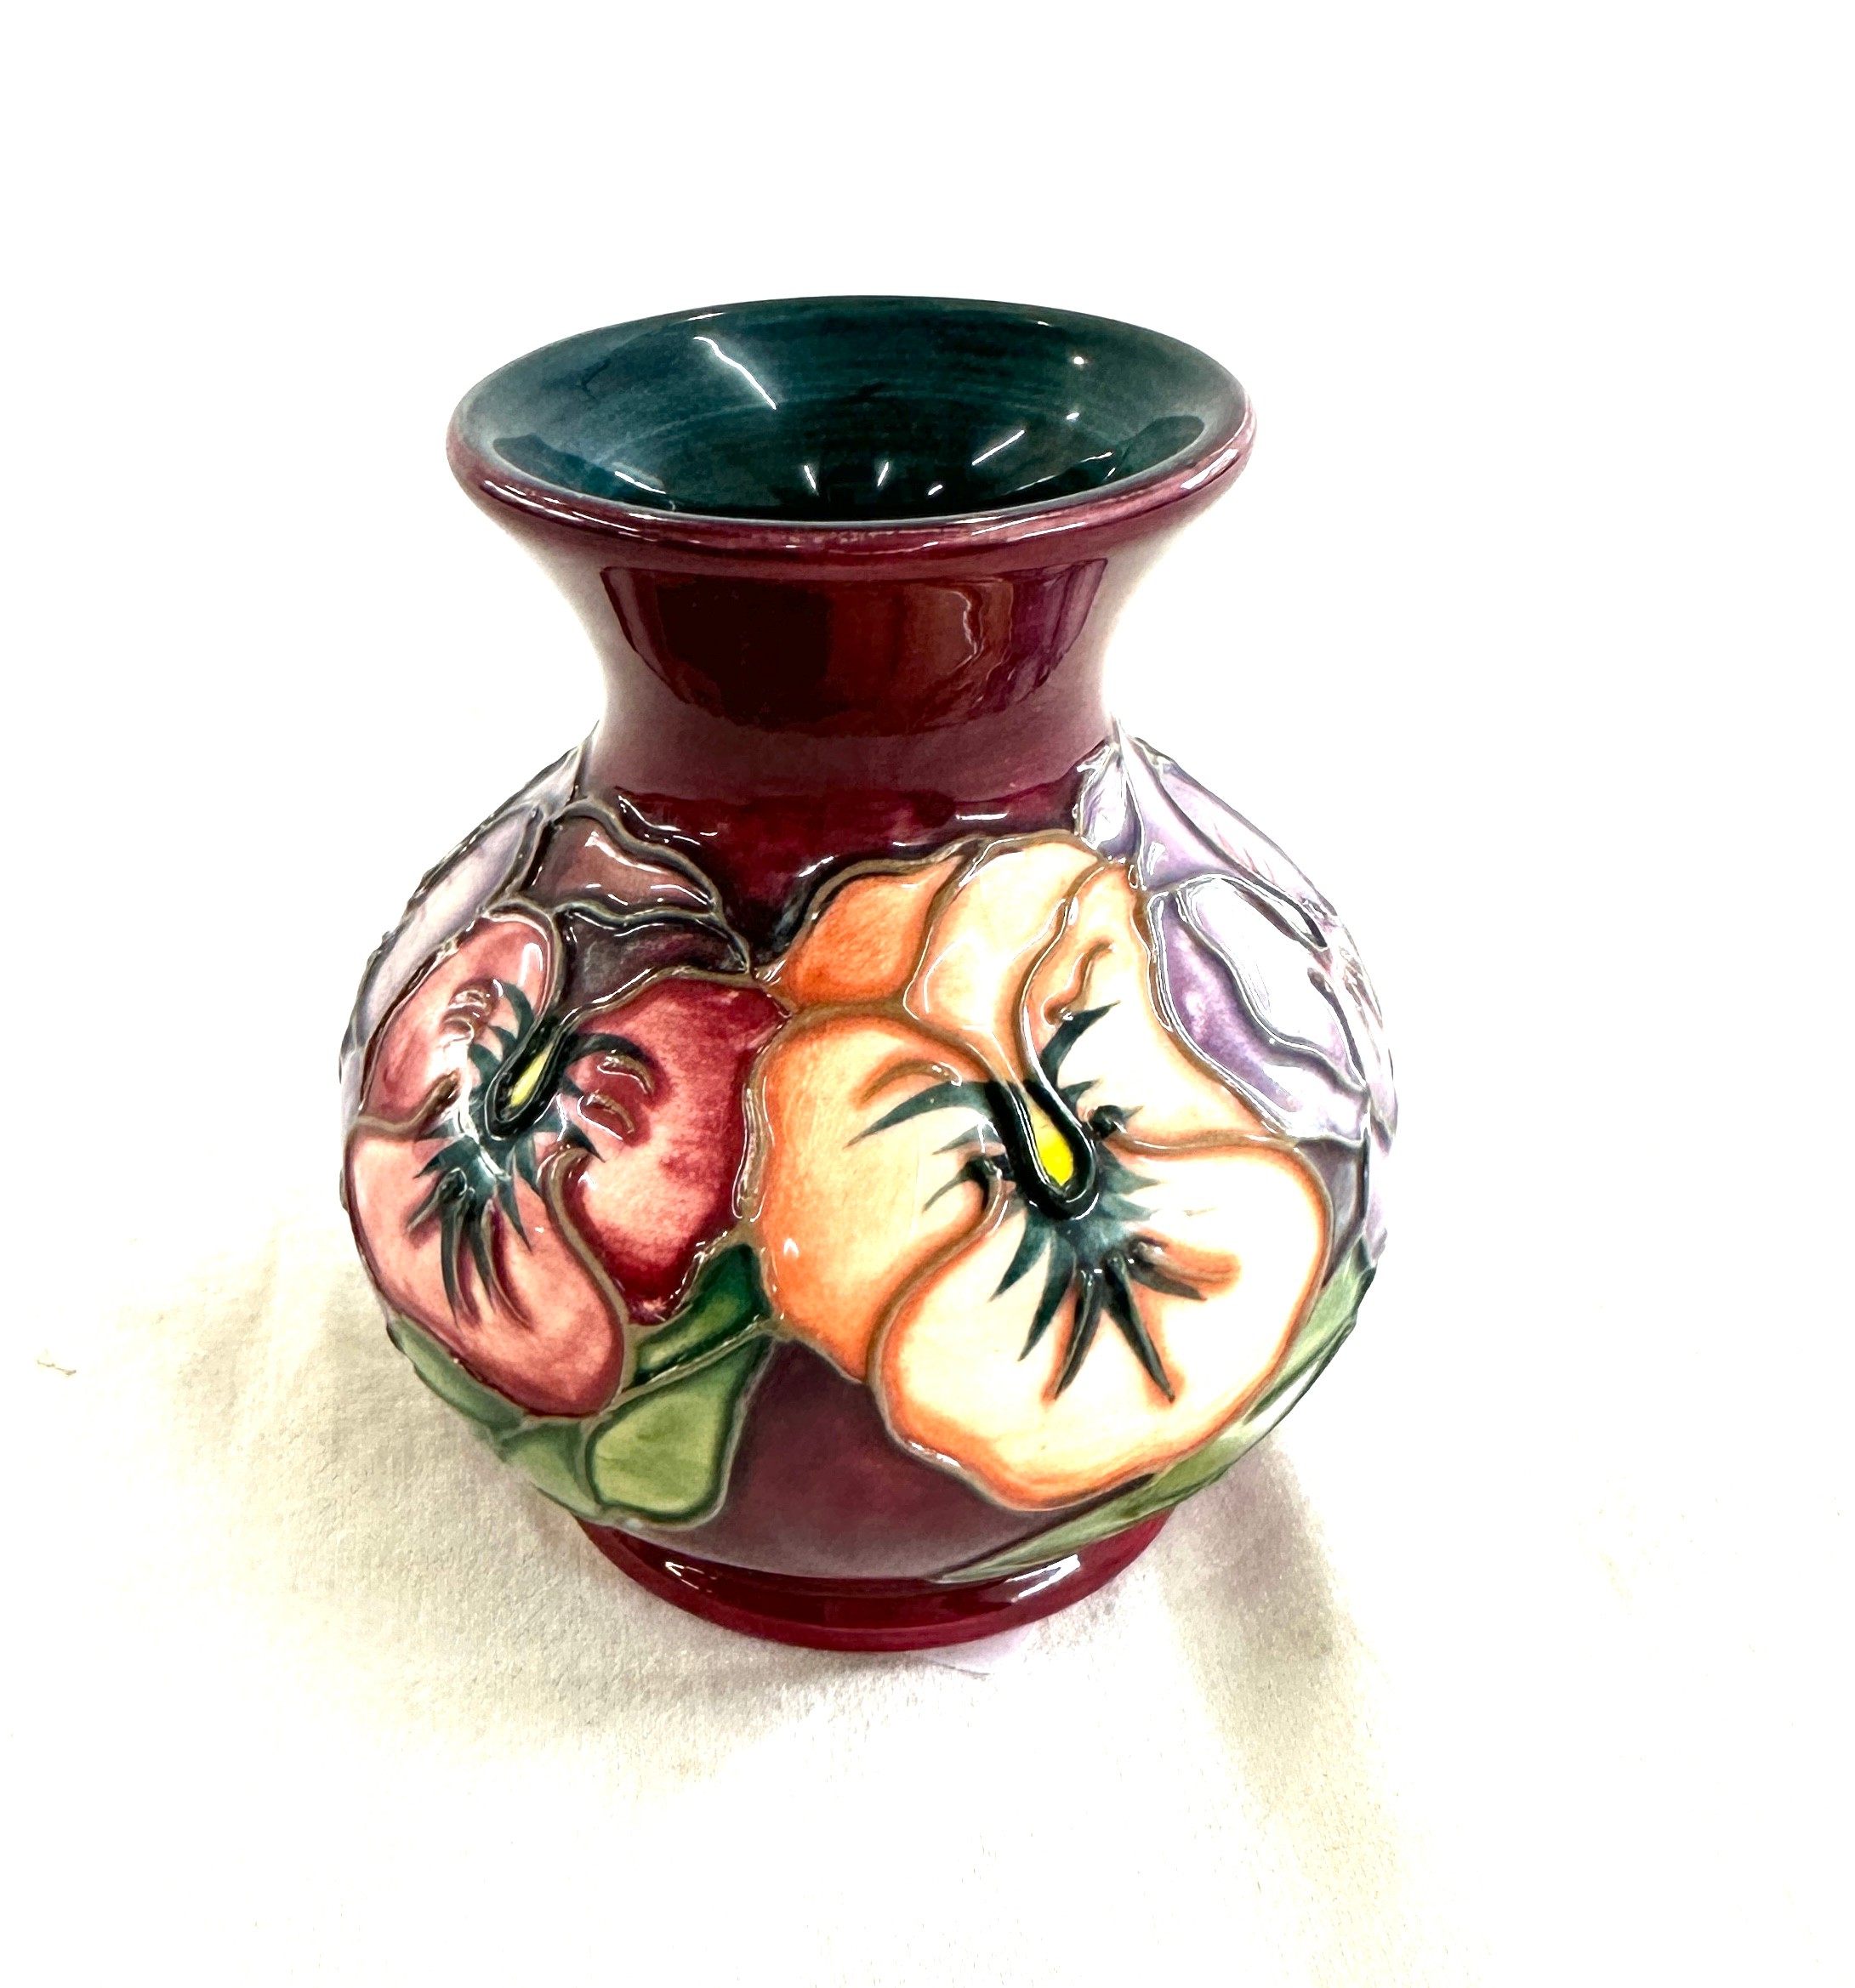 1993 Moorcroft potter vase 3.5 inches tall - Image 2 of 5